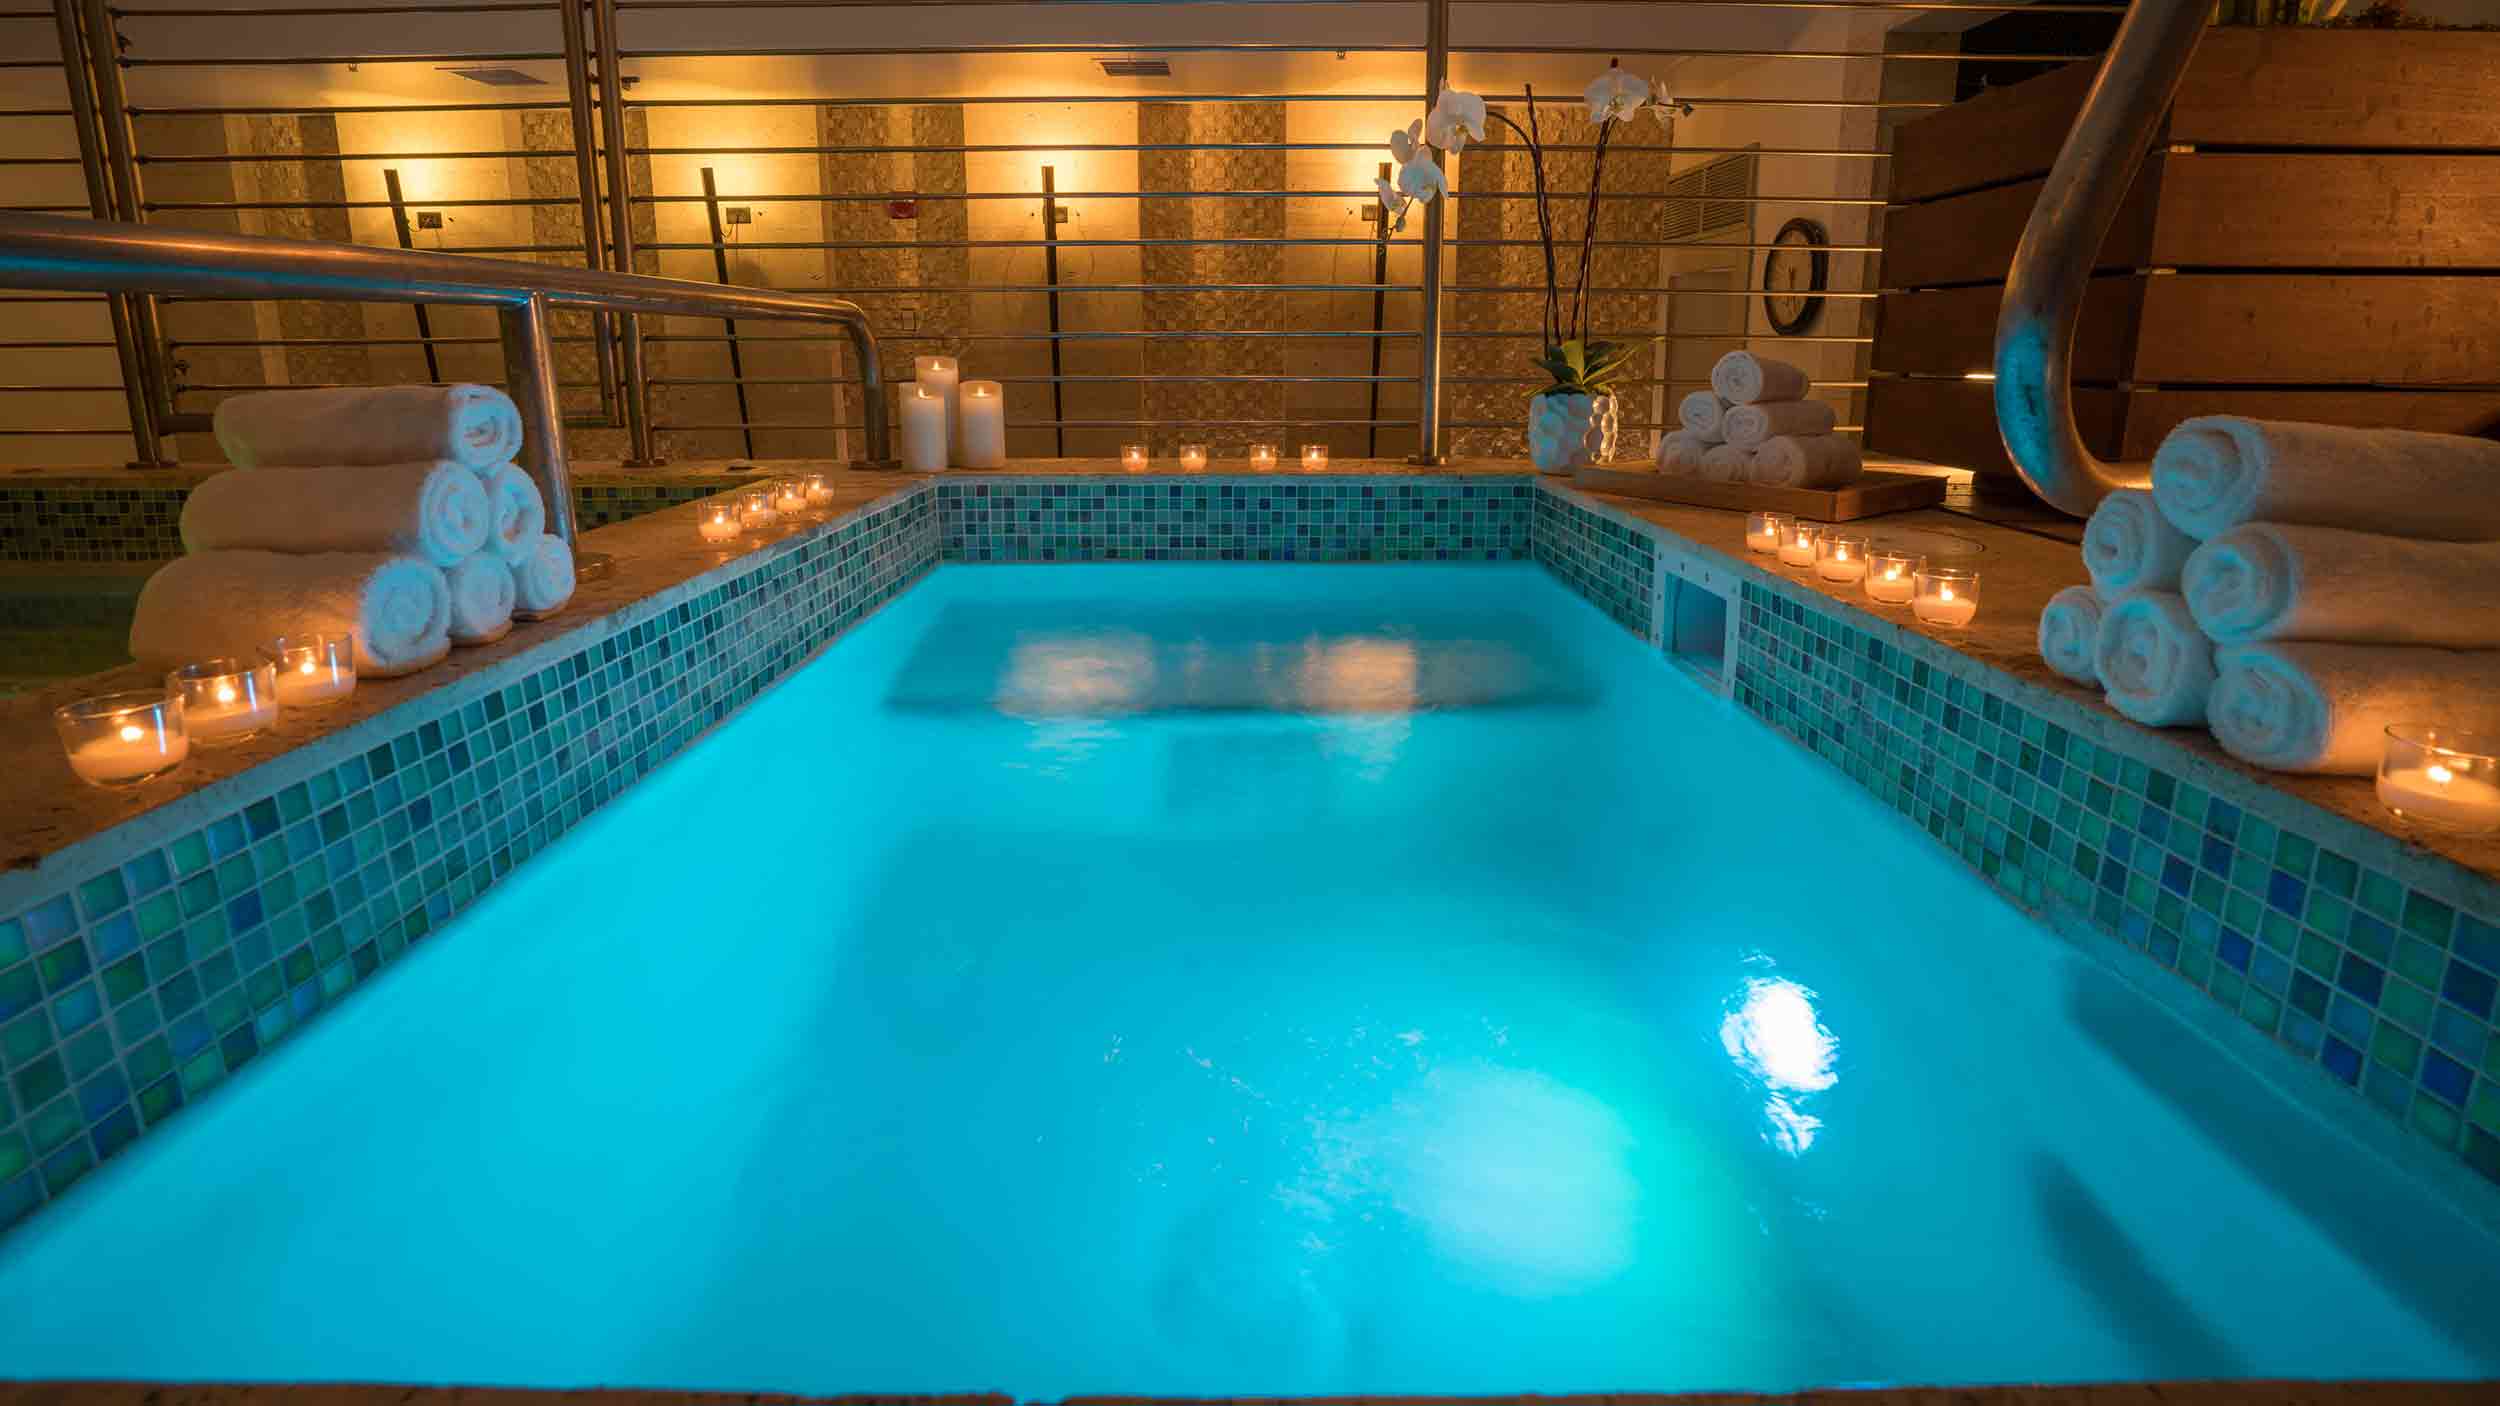 Hydrotherapy pool at the Esencia Wellness Spa